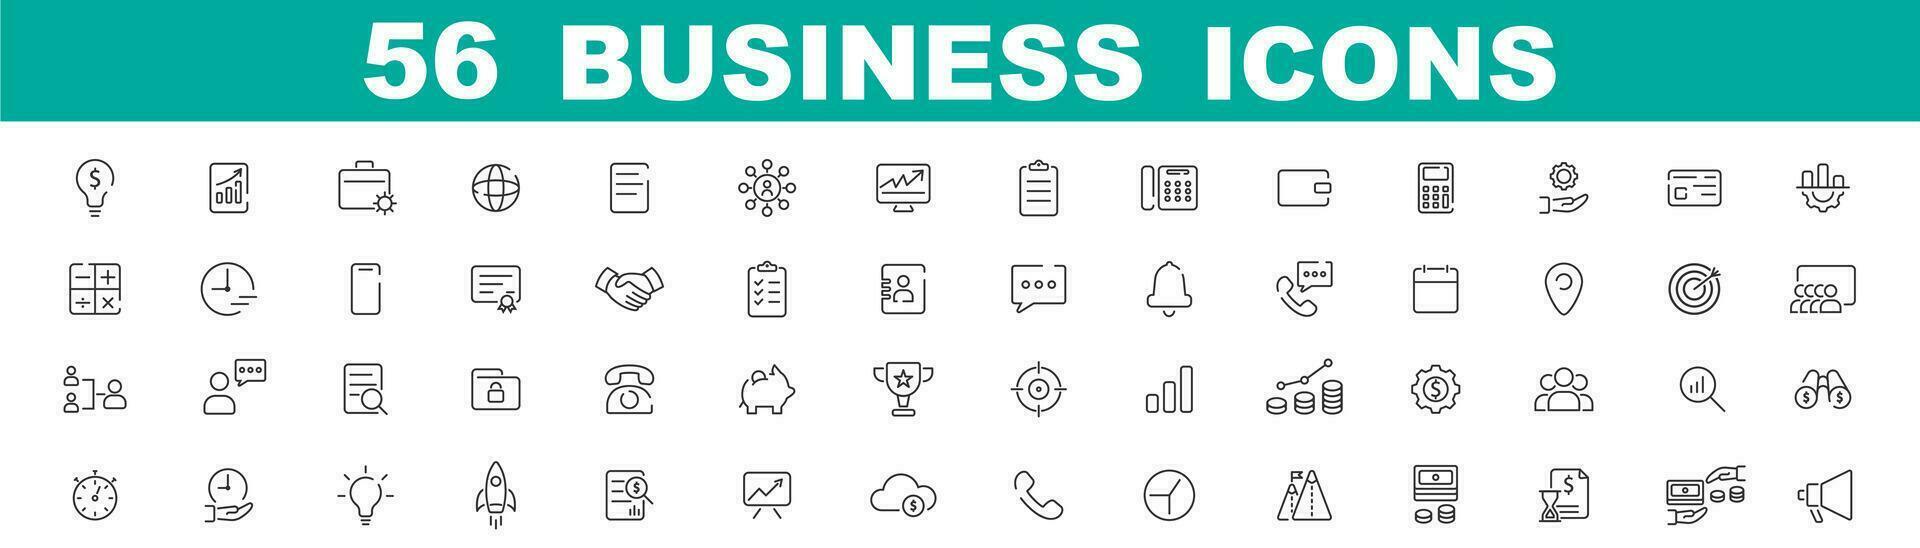 Business line icons. Big set of business outline icons. Teamwork symbol collection. Office icons in outline. Marketing and success collection vector